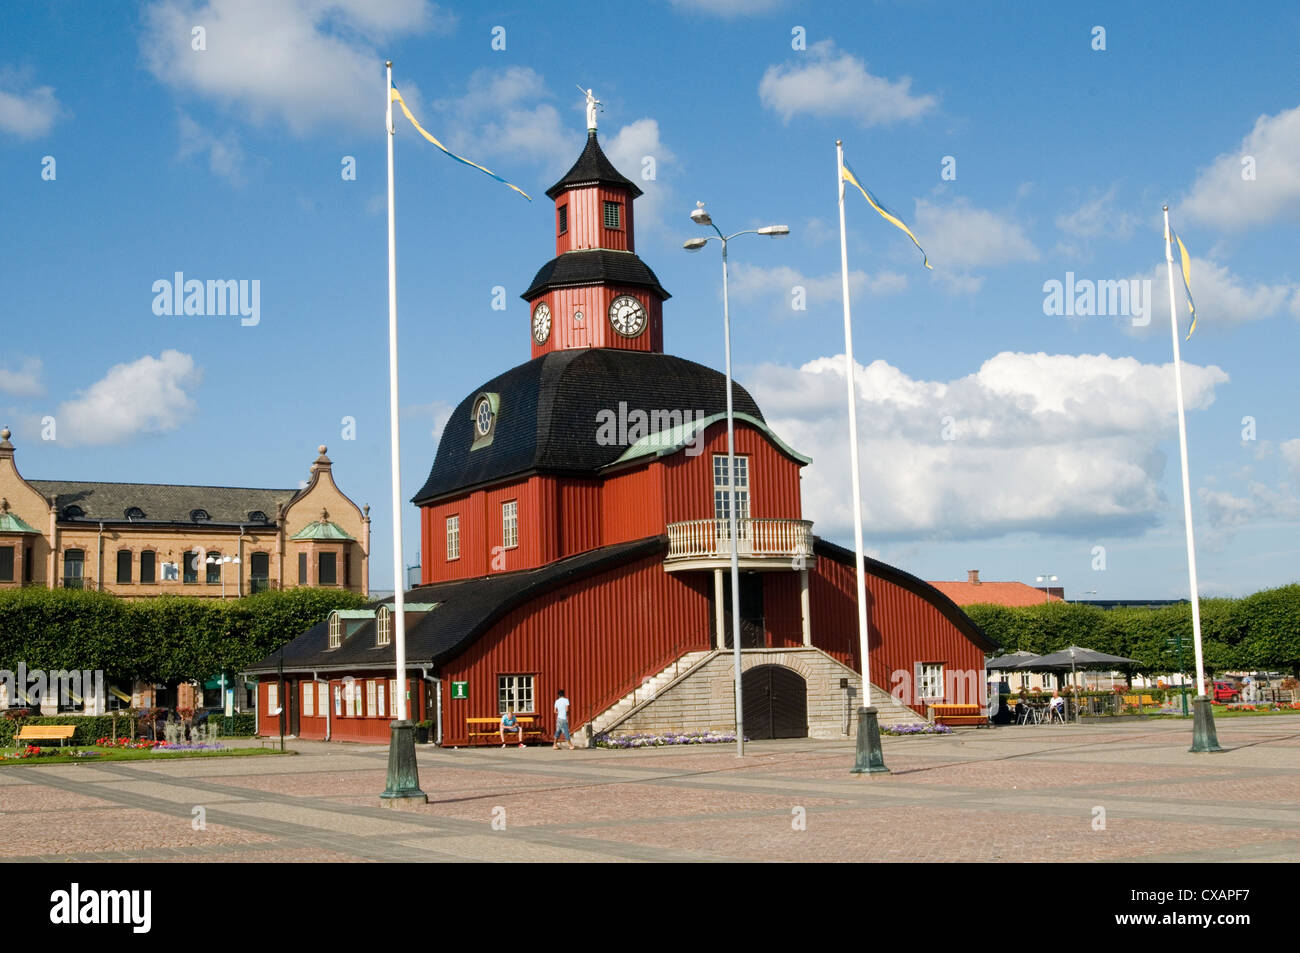 Lidköping town square sweden swedish falun red paint building Stock Photo